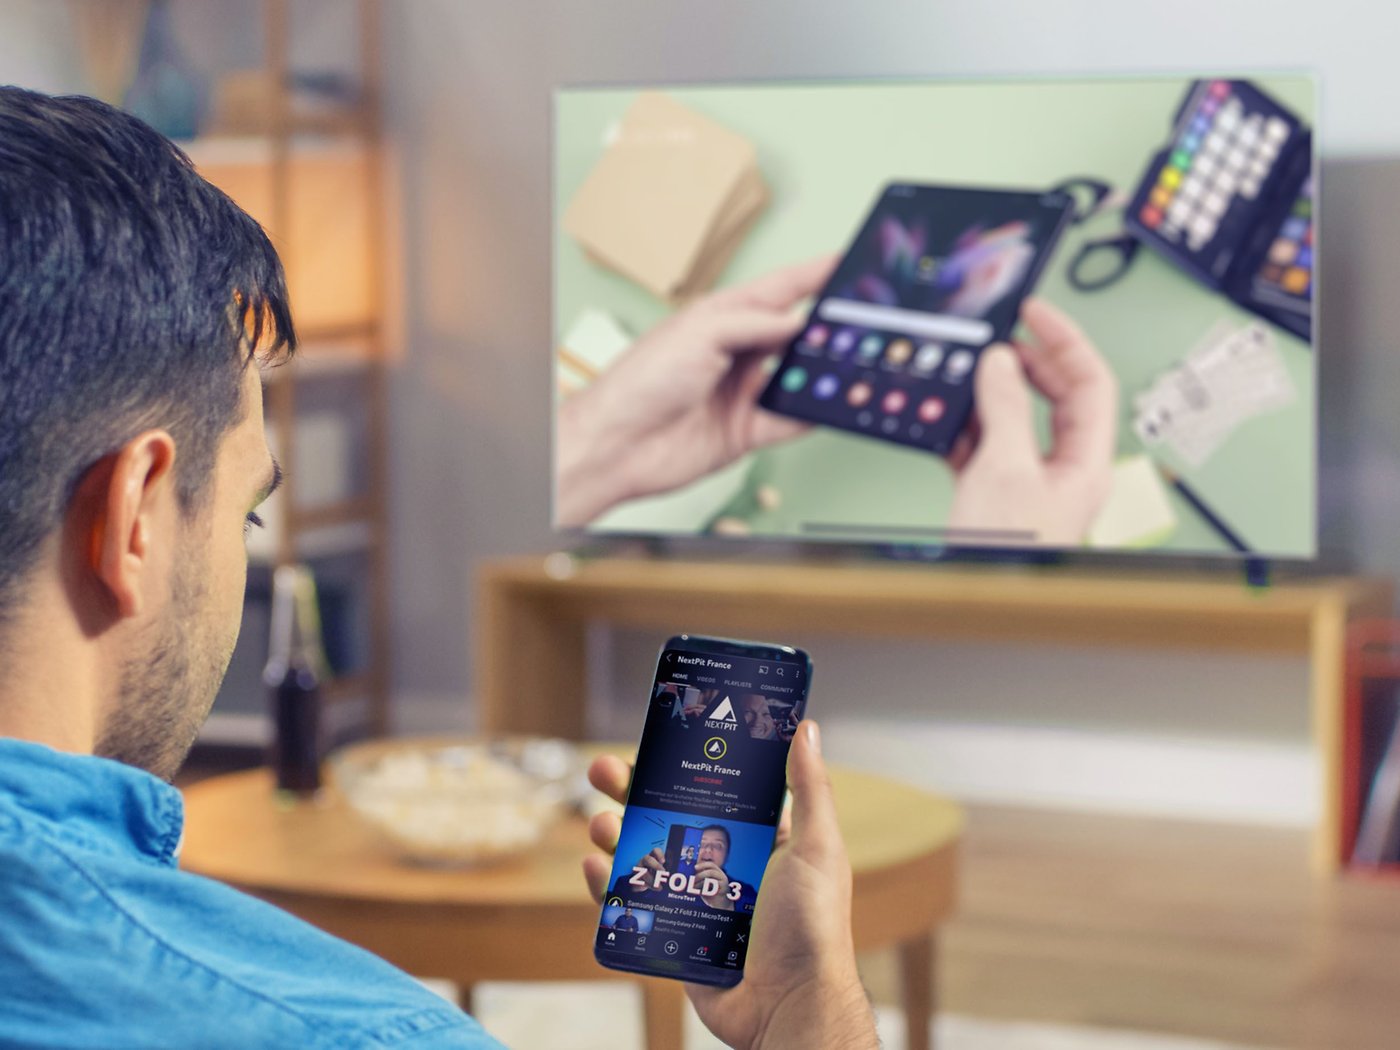 Android Phone To TV Connection: A Step-by-Step Guide